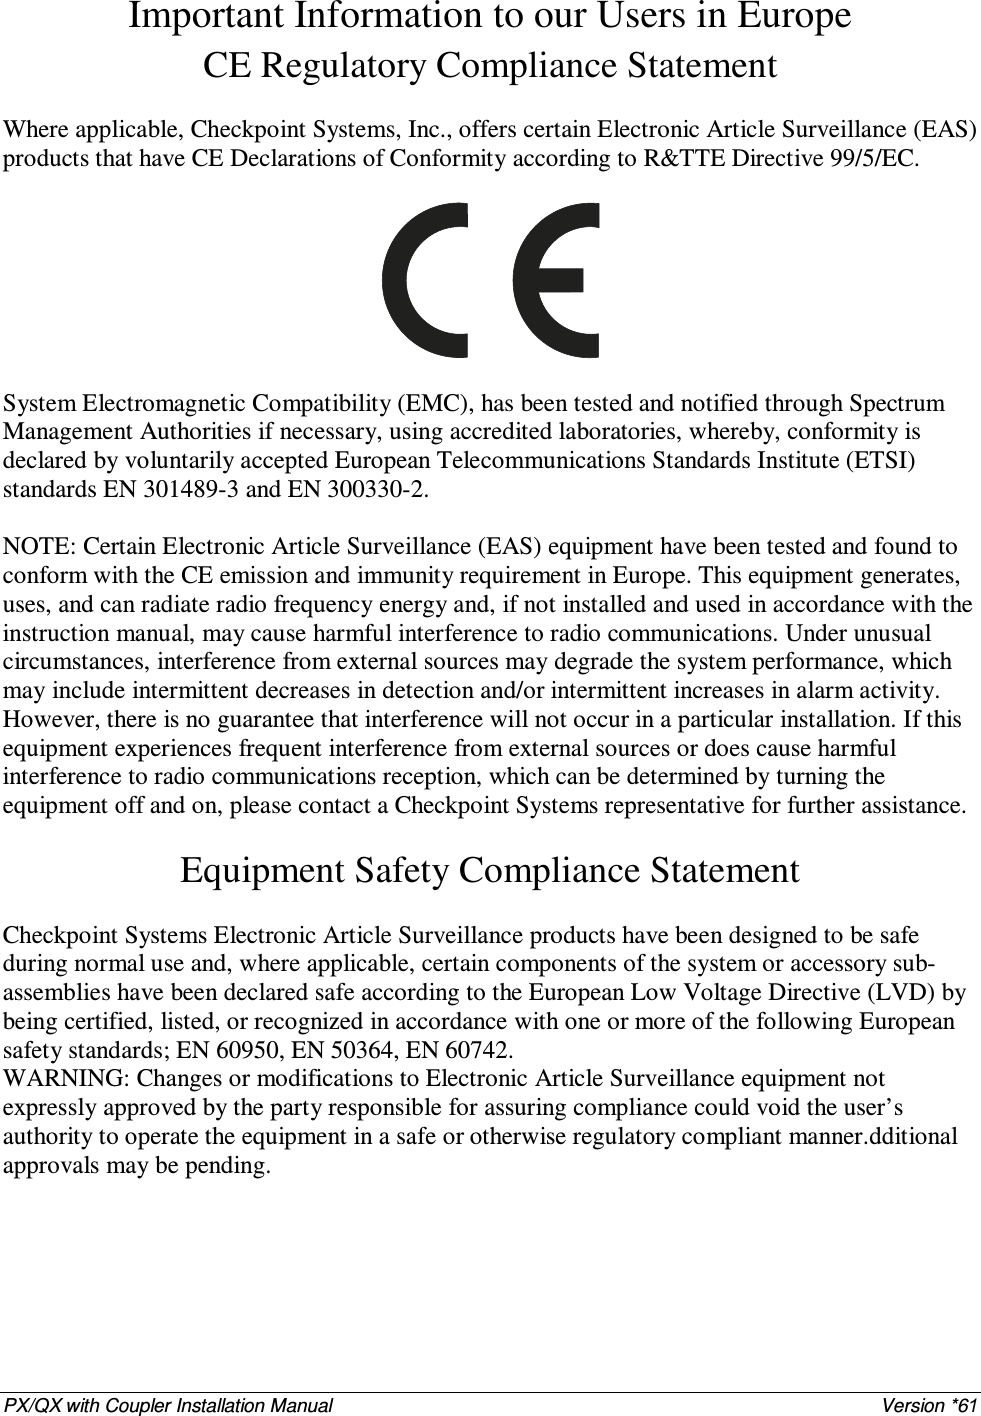 PX/QX with Coupler Installation Manual    Version *61 Important Information to our Users in Europe CE Regulatory Compliance Statement  Where applicable, Checkpoint Systems, Inc., offers certain Electronic Article Surveillance (EAS) products that have CE Declarations of Conformity according to R&amp;TTE Directive 99/5/EC.    System Electromagnetic Compatibility (EMC), has been tested and notified through Spectrum Management Authorities if necessary, using accredited laboratories, whereby, conformity is declared by voluntarily accepted European Telecommunications Standards Institute (ETSI) standards EN 301489-3 and EN 300330-2.  NOTE: Certain Electronic Article Surveillance (EAS) equipment have been tested and found to conform with the CE emission and immunity requirement in Europe. This equipment generates, uses, and can radiate radio frequency energy and, if not installed and used in accordance with the instruction manual, may cause harmful interference to radio communications. Under unusual circumstances, interference from external sources may degrade the system performance, which may include intermittent decreases in detection and/or intermittent increases in alarm activity. However, there is no guarantee that interference will not occur in a particular installation. If this equipment experiences frequent interference from external sources or does cause harmful interference to radio communications reception, which can be determined by turning the equipment off and on, please contact a Checkpoint Systems representative for further assistance.  Equipment Safety Compliance Statement  Checkpoint Systems Electronic Article Surveillance products have been designed to be safe during normal use and, where applicable, certain components of the system or accessory sub-assemblies have been declared safe according to the European Low Voltage Directive (LVD) by being certified, listed, or recognized in accordance with one or more of the following European safety standards; EN 60950, EN 50364, EN 60742. WARNING: Changes or modifications to Electronic Article Surveillance equipment not expressly approved by the party responsible for assuring compliance could void the user’s authority to operate the equipment in a safe or otherwise regulatory compliant manner.dditional approvals may be pending. 